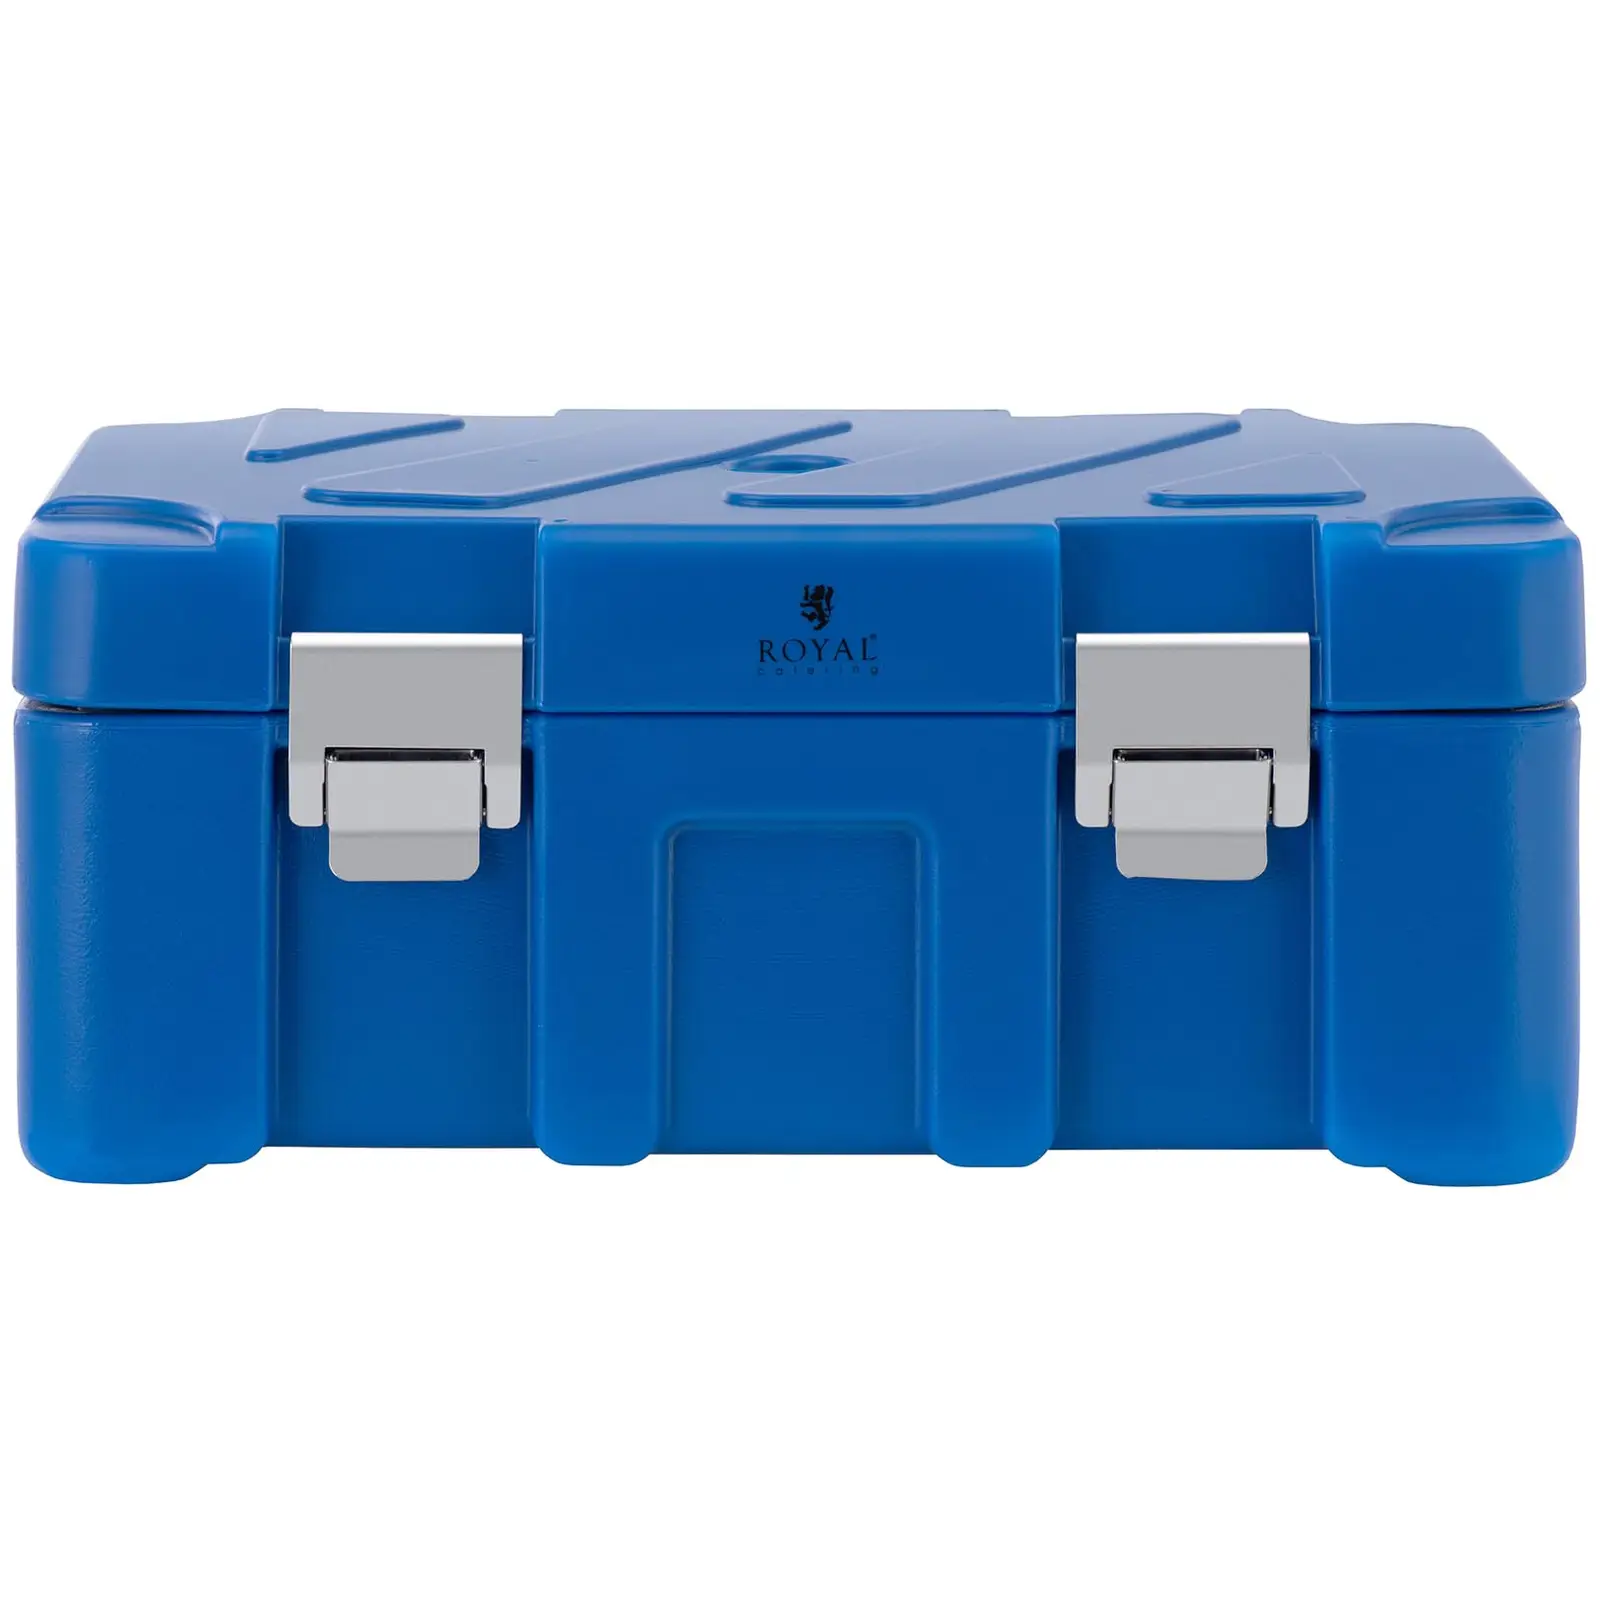 Thermobox - 22 L - Royal Catering